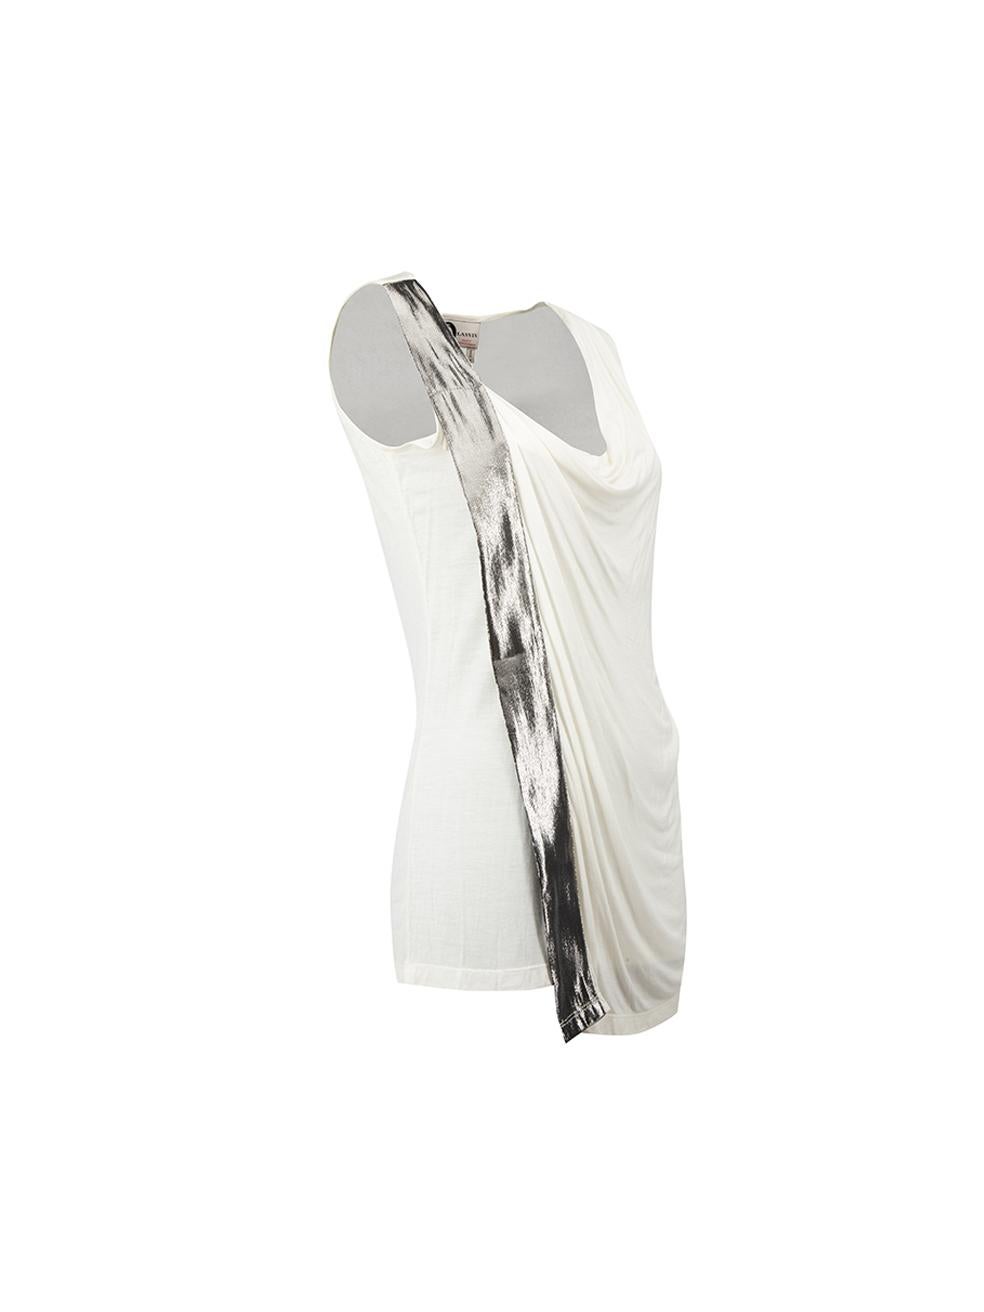 CONDITION is Very good. Minimal wear to top is evident where a small striped stain on back can be seen on this used Lanvin designer resale item. 
 
 Details
  Cream
 Viscose
 Sleeveless top
 Drape round neckline
 Silver taping on one side
 
 
 Made